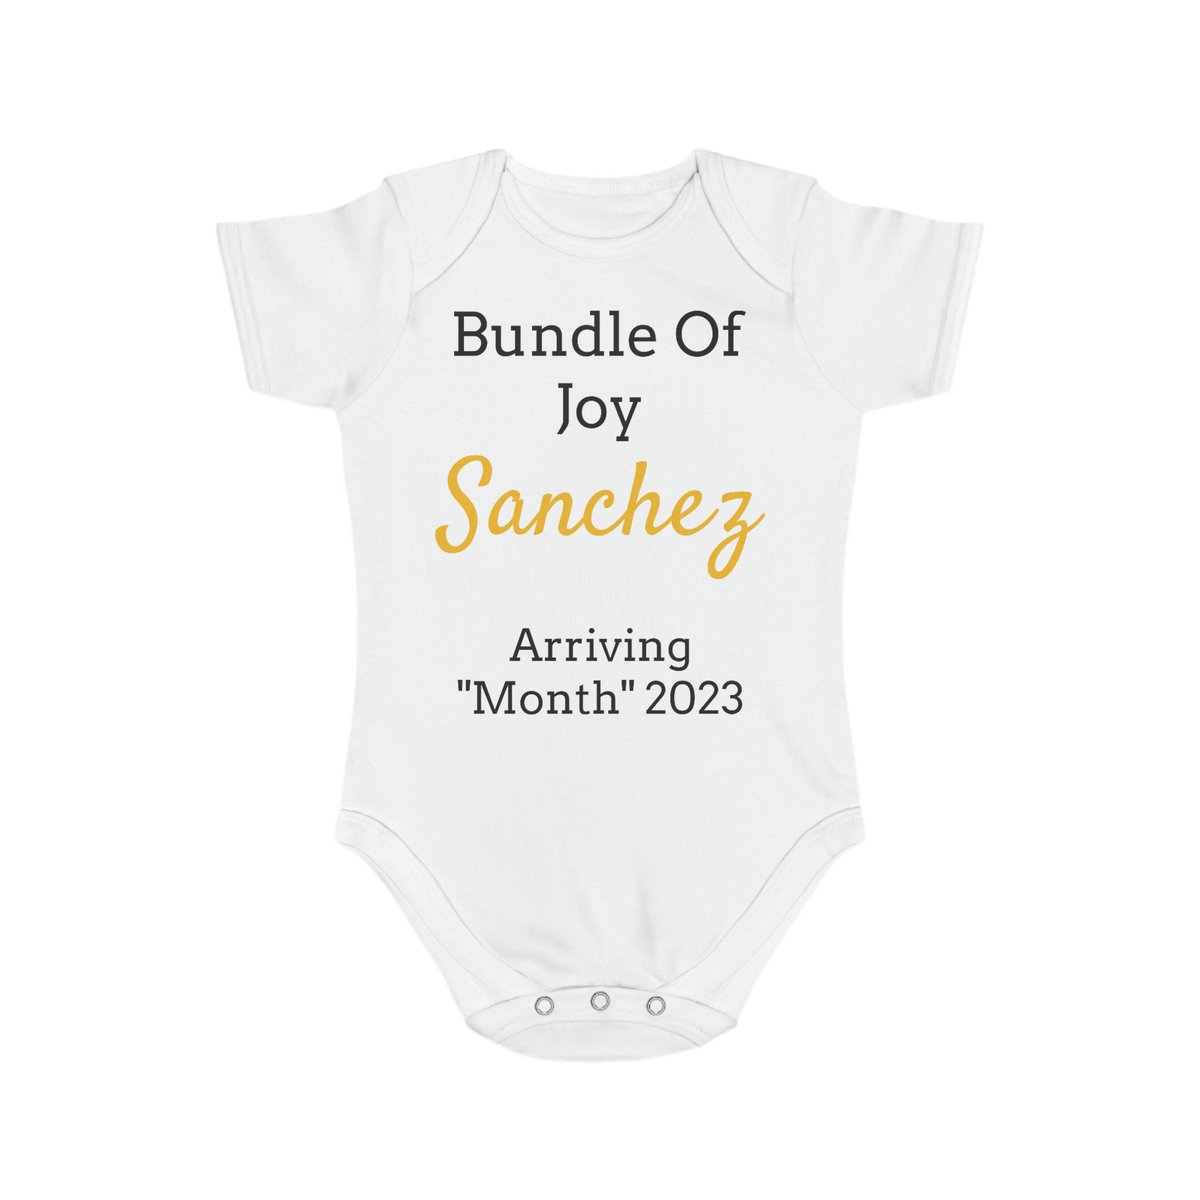 Excited to share the latest addition to my #etsy shop: Bundle of Joy arriving 2023 Short Sleeve Baby Bodysuit etsy.me/3PuFpEp #gold #clear #organiccotton #1stbirthday #mothersday #giftforher #customshirt #valentinegift #valentinesgiftsher